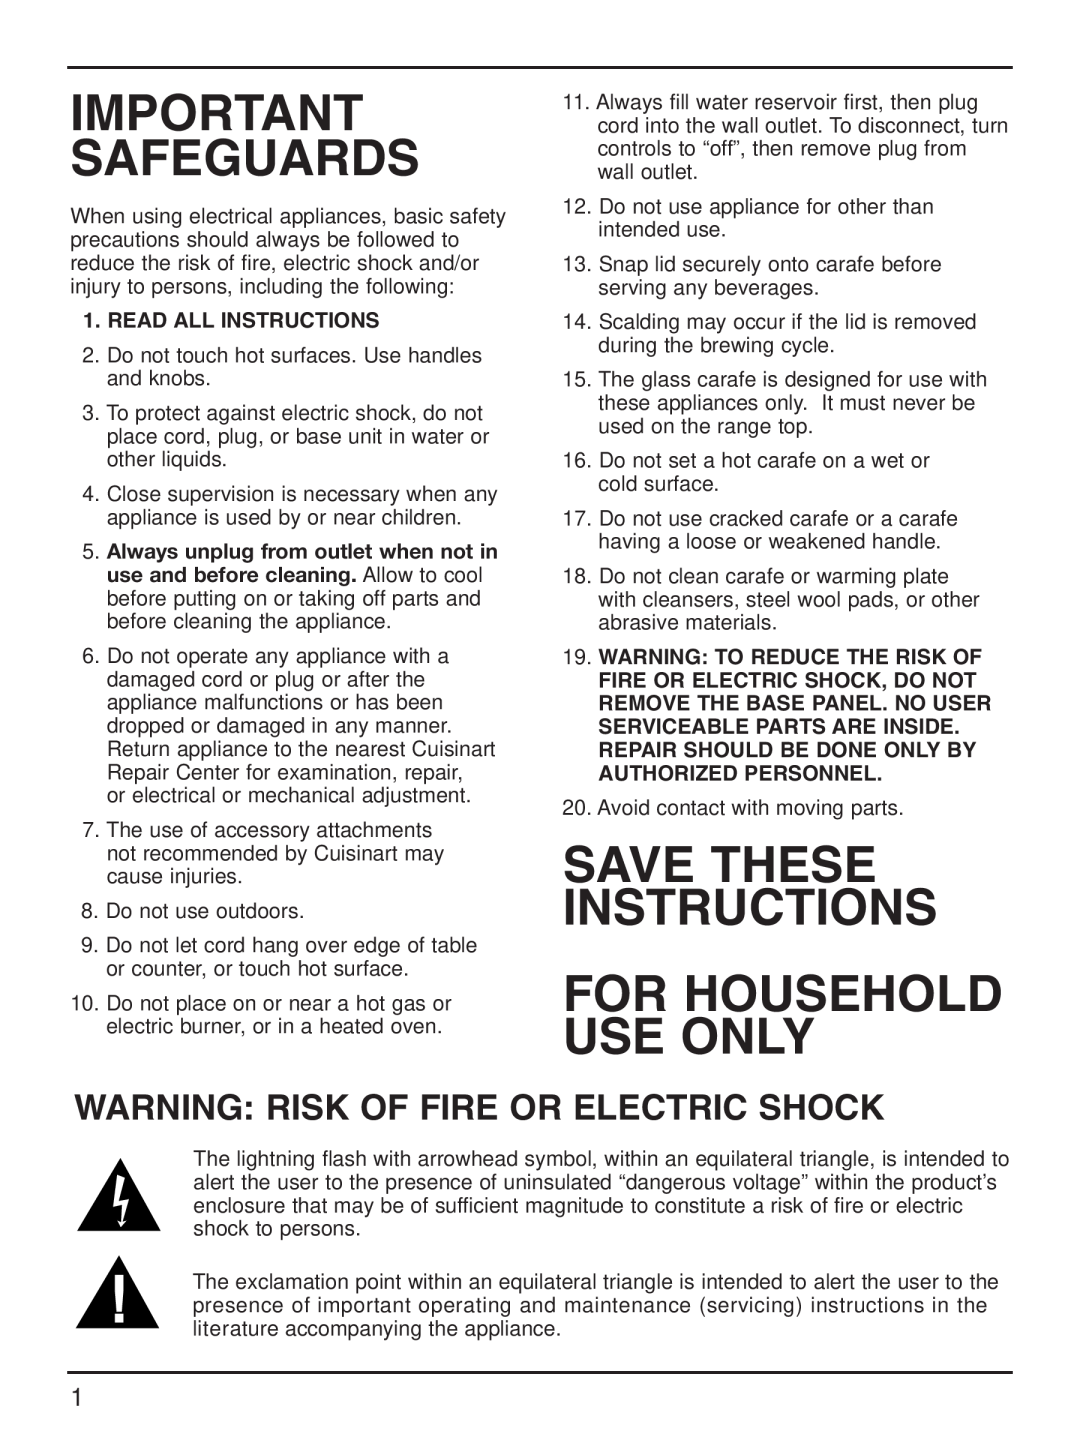 Cuisinart DCC-1200 manual Warning Risk Of Fire Or Electric Shock, Important Safeguards, Read All Instructions 